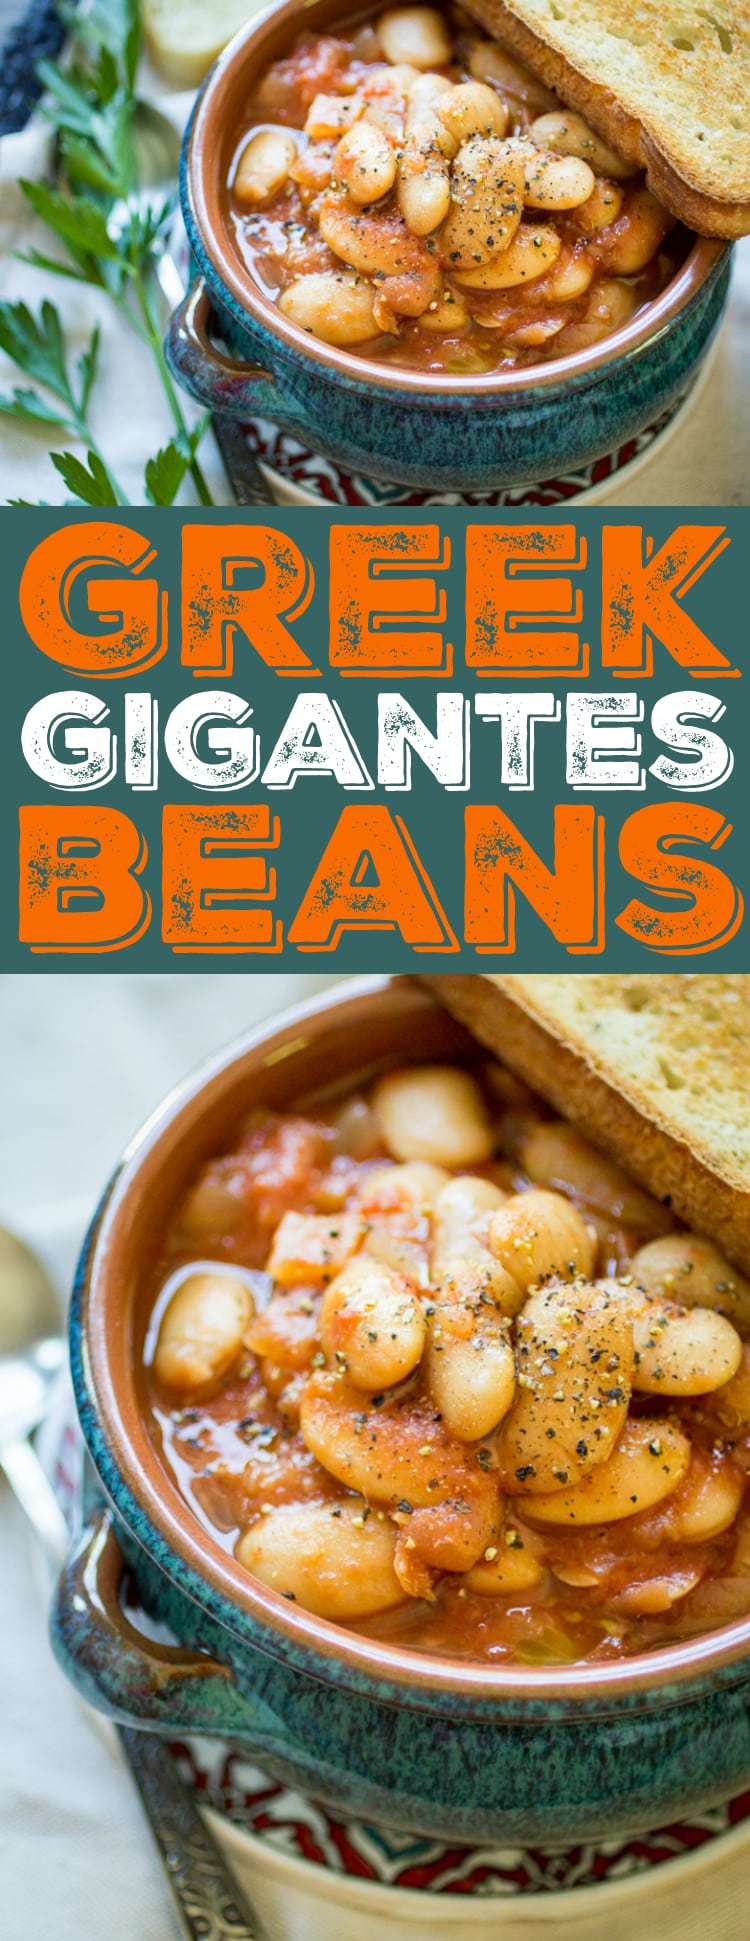 Greek Gigantes are, not surprisingly, GIANT beans! In this recipe, the gigantes are slow cooked in a rich tomato sauce until perfectly creamy and tender. Serve over toasted crusty bread for an easy vegetarian meal!